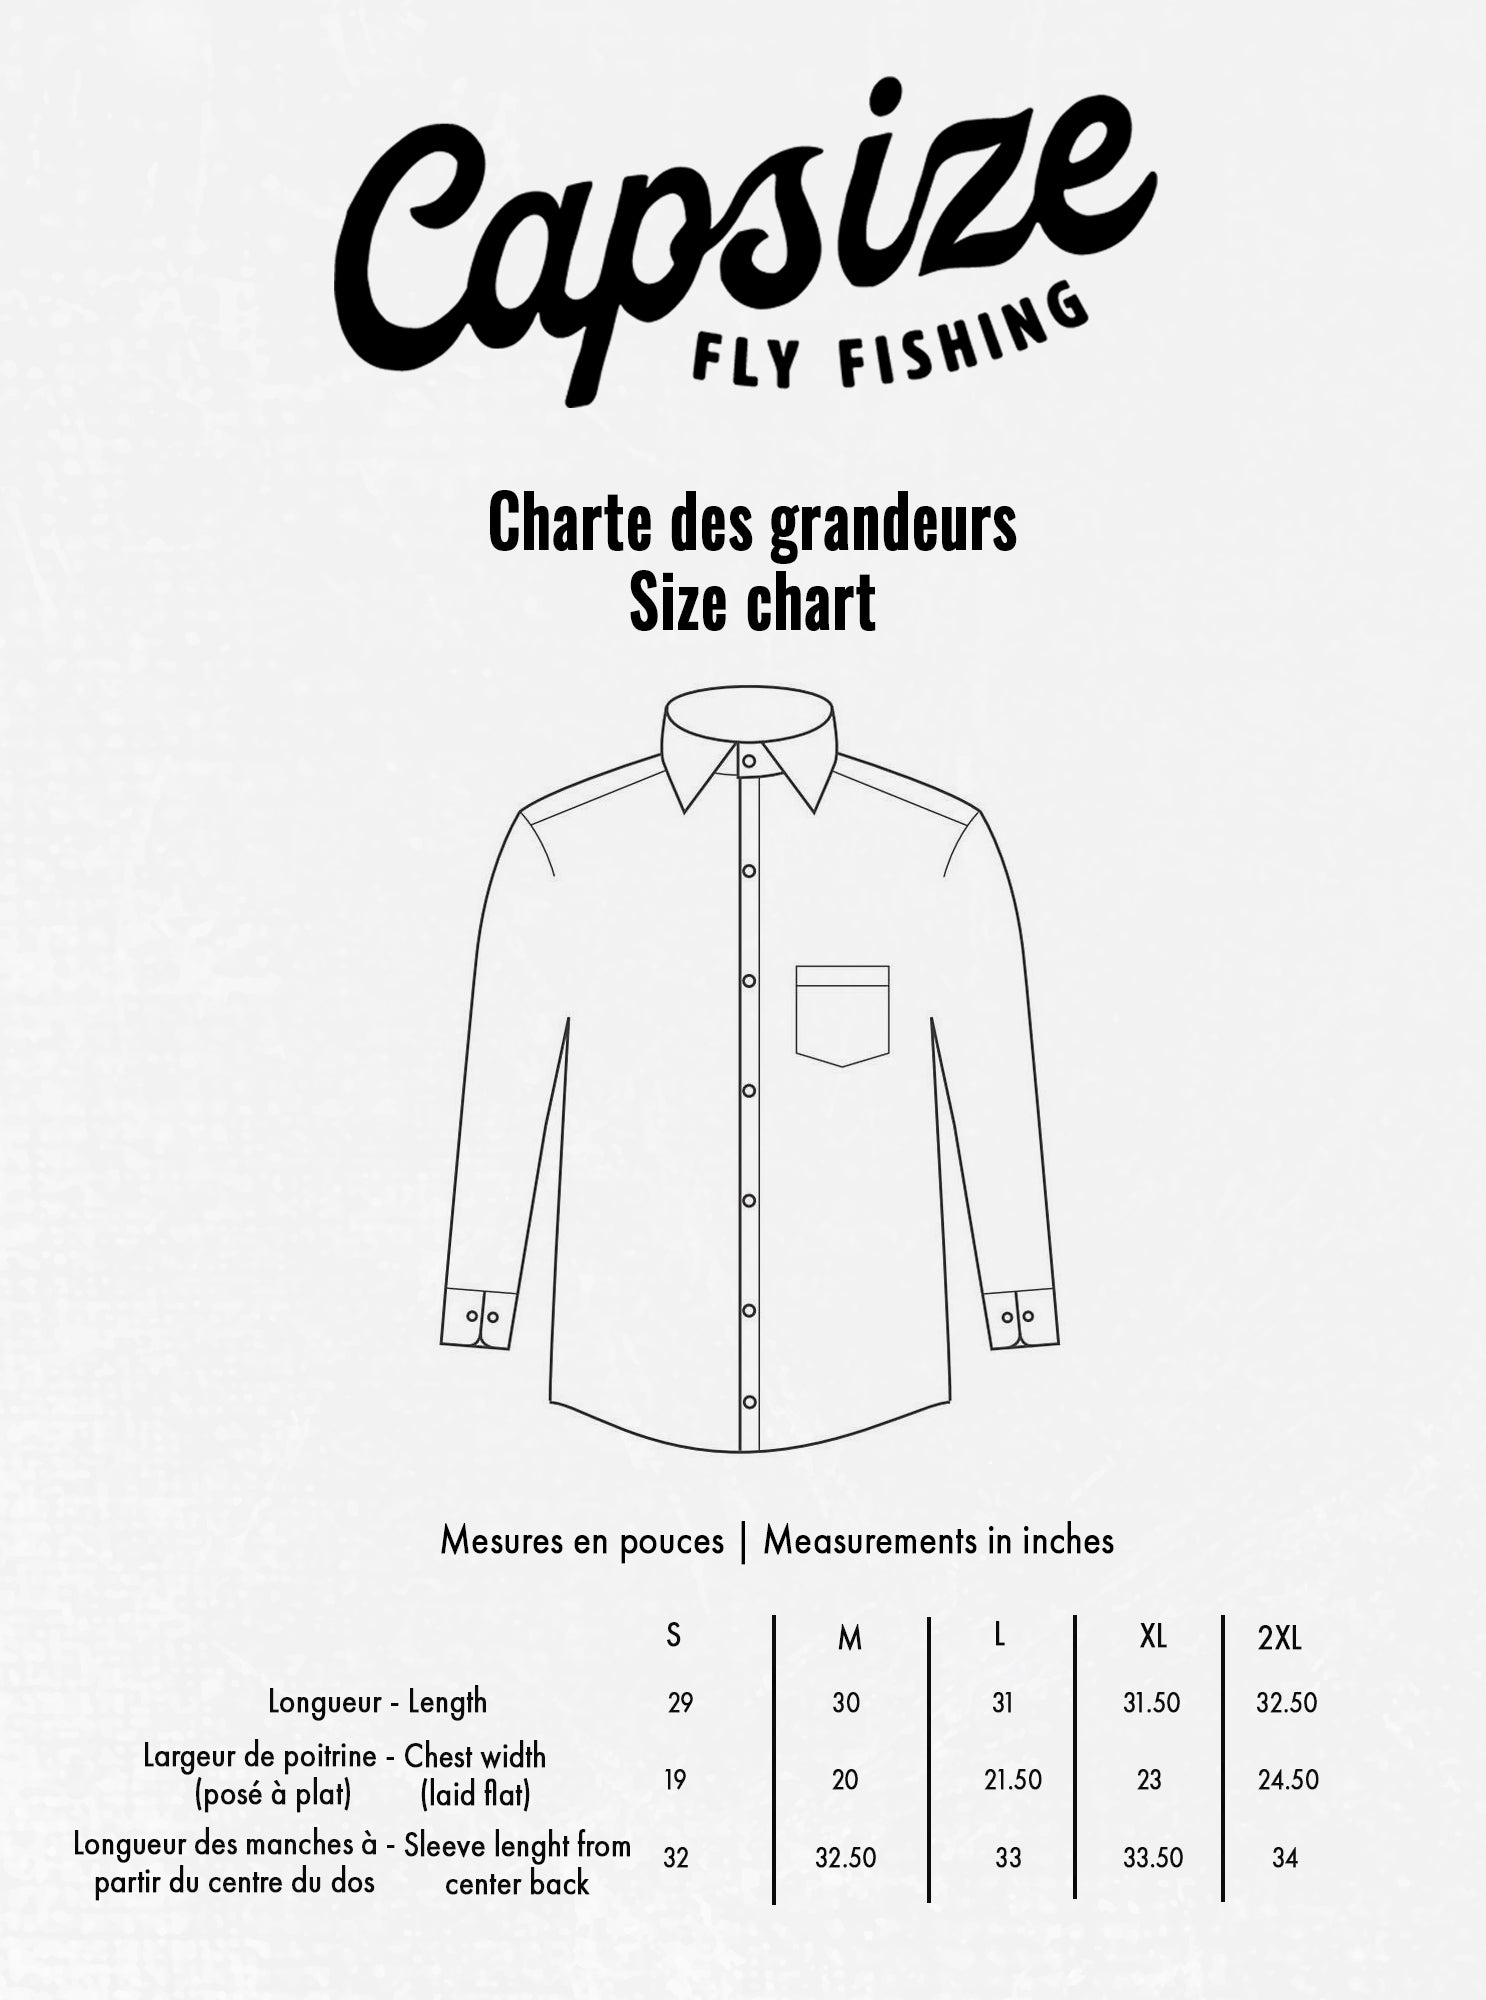 Fly Fishing Flannel Shirts | W's Riverside Lightweight Canadian Flannel - Capsize Fly Fishing